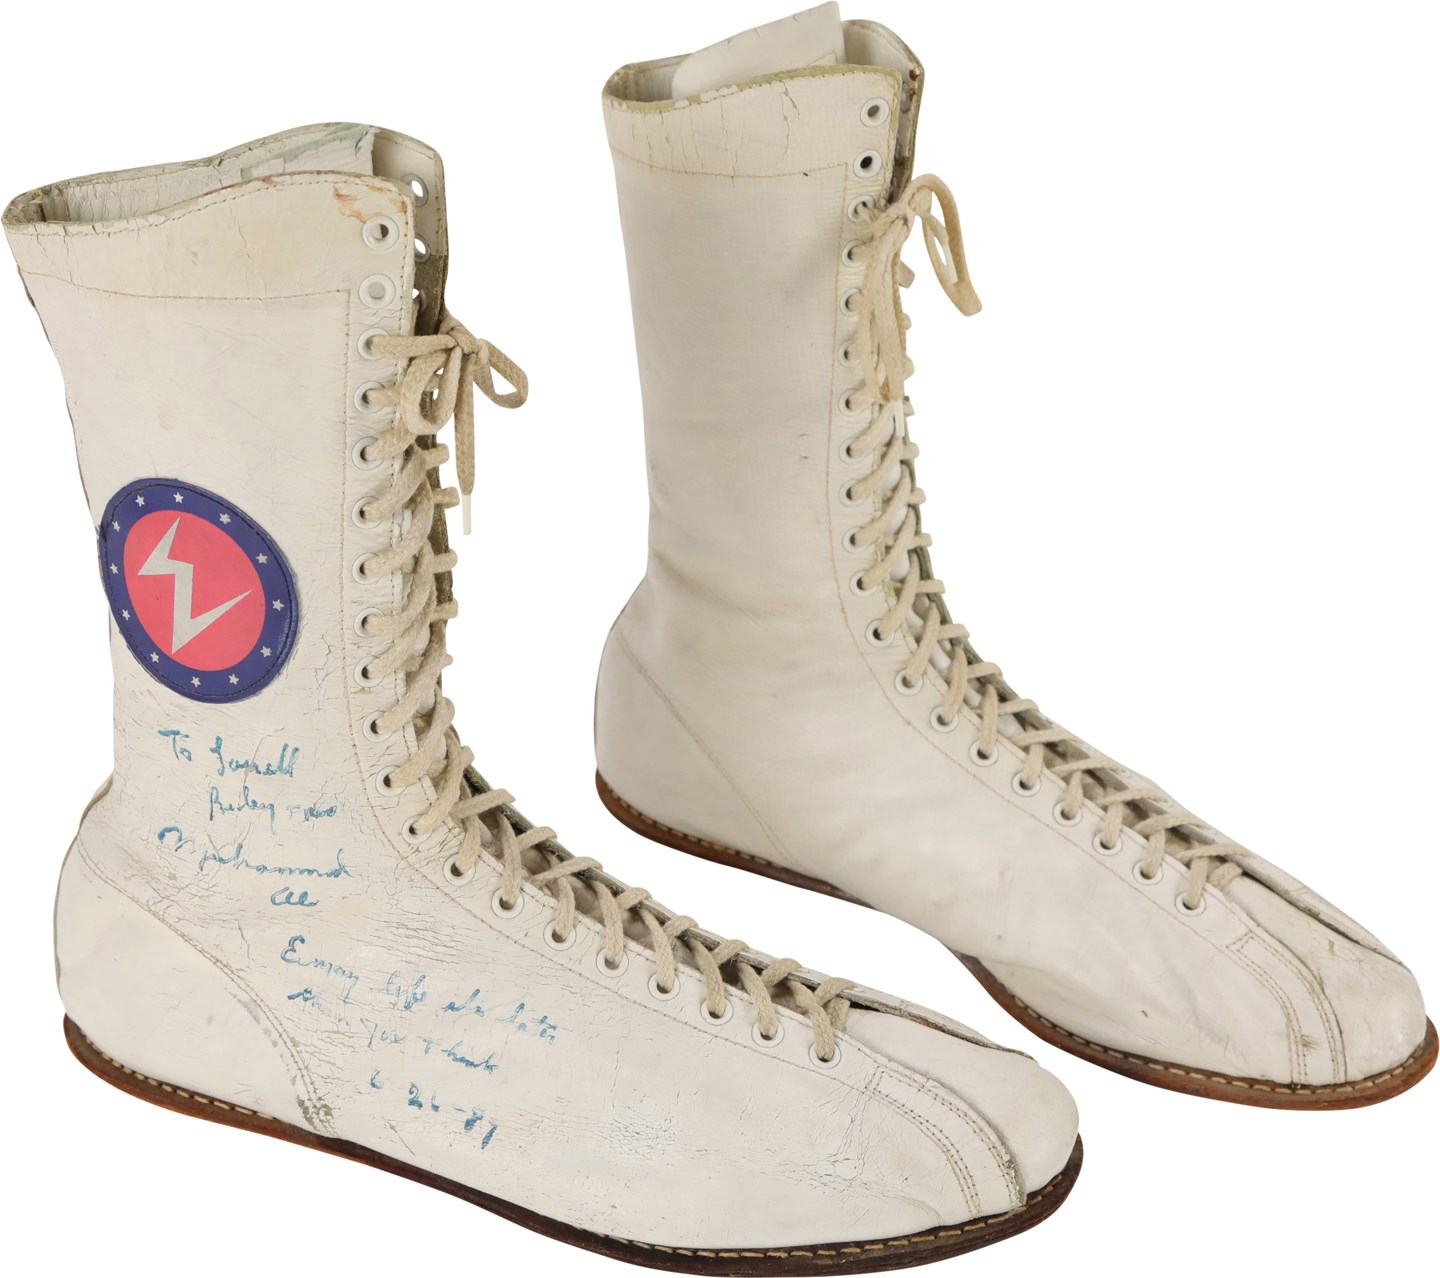 1970s Muhammad Ali Worn and Signed Everlast Boxing Shoes (Gifted to Personal Photographer, Lowell Riley)